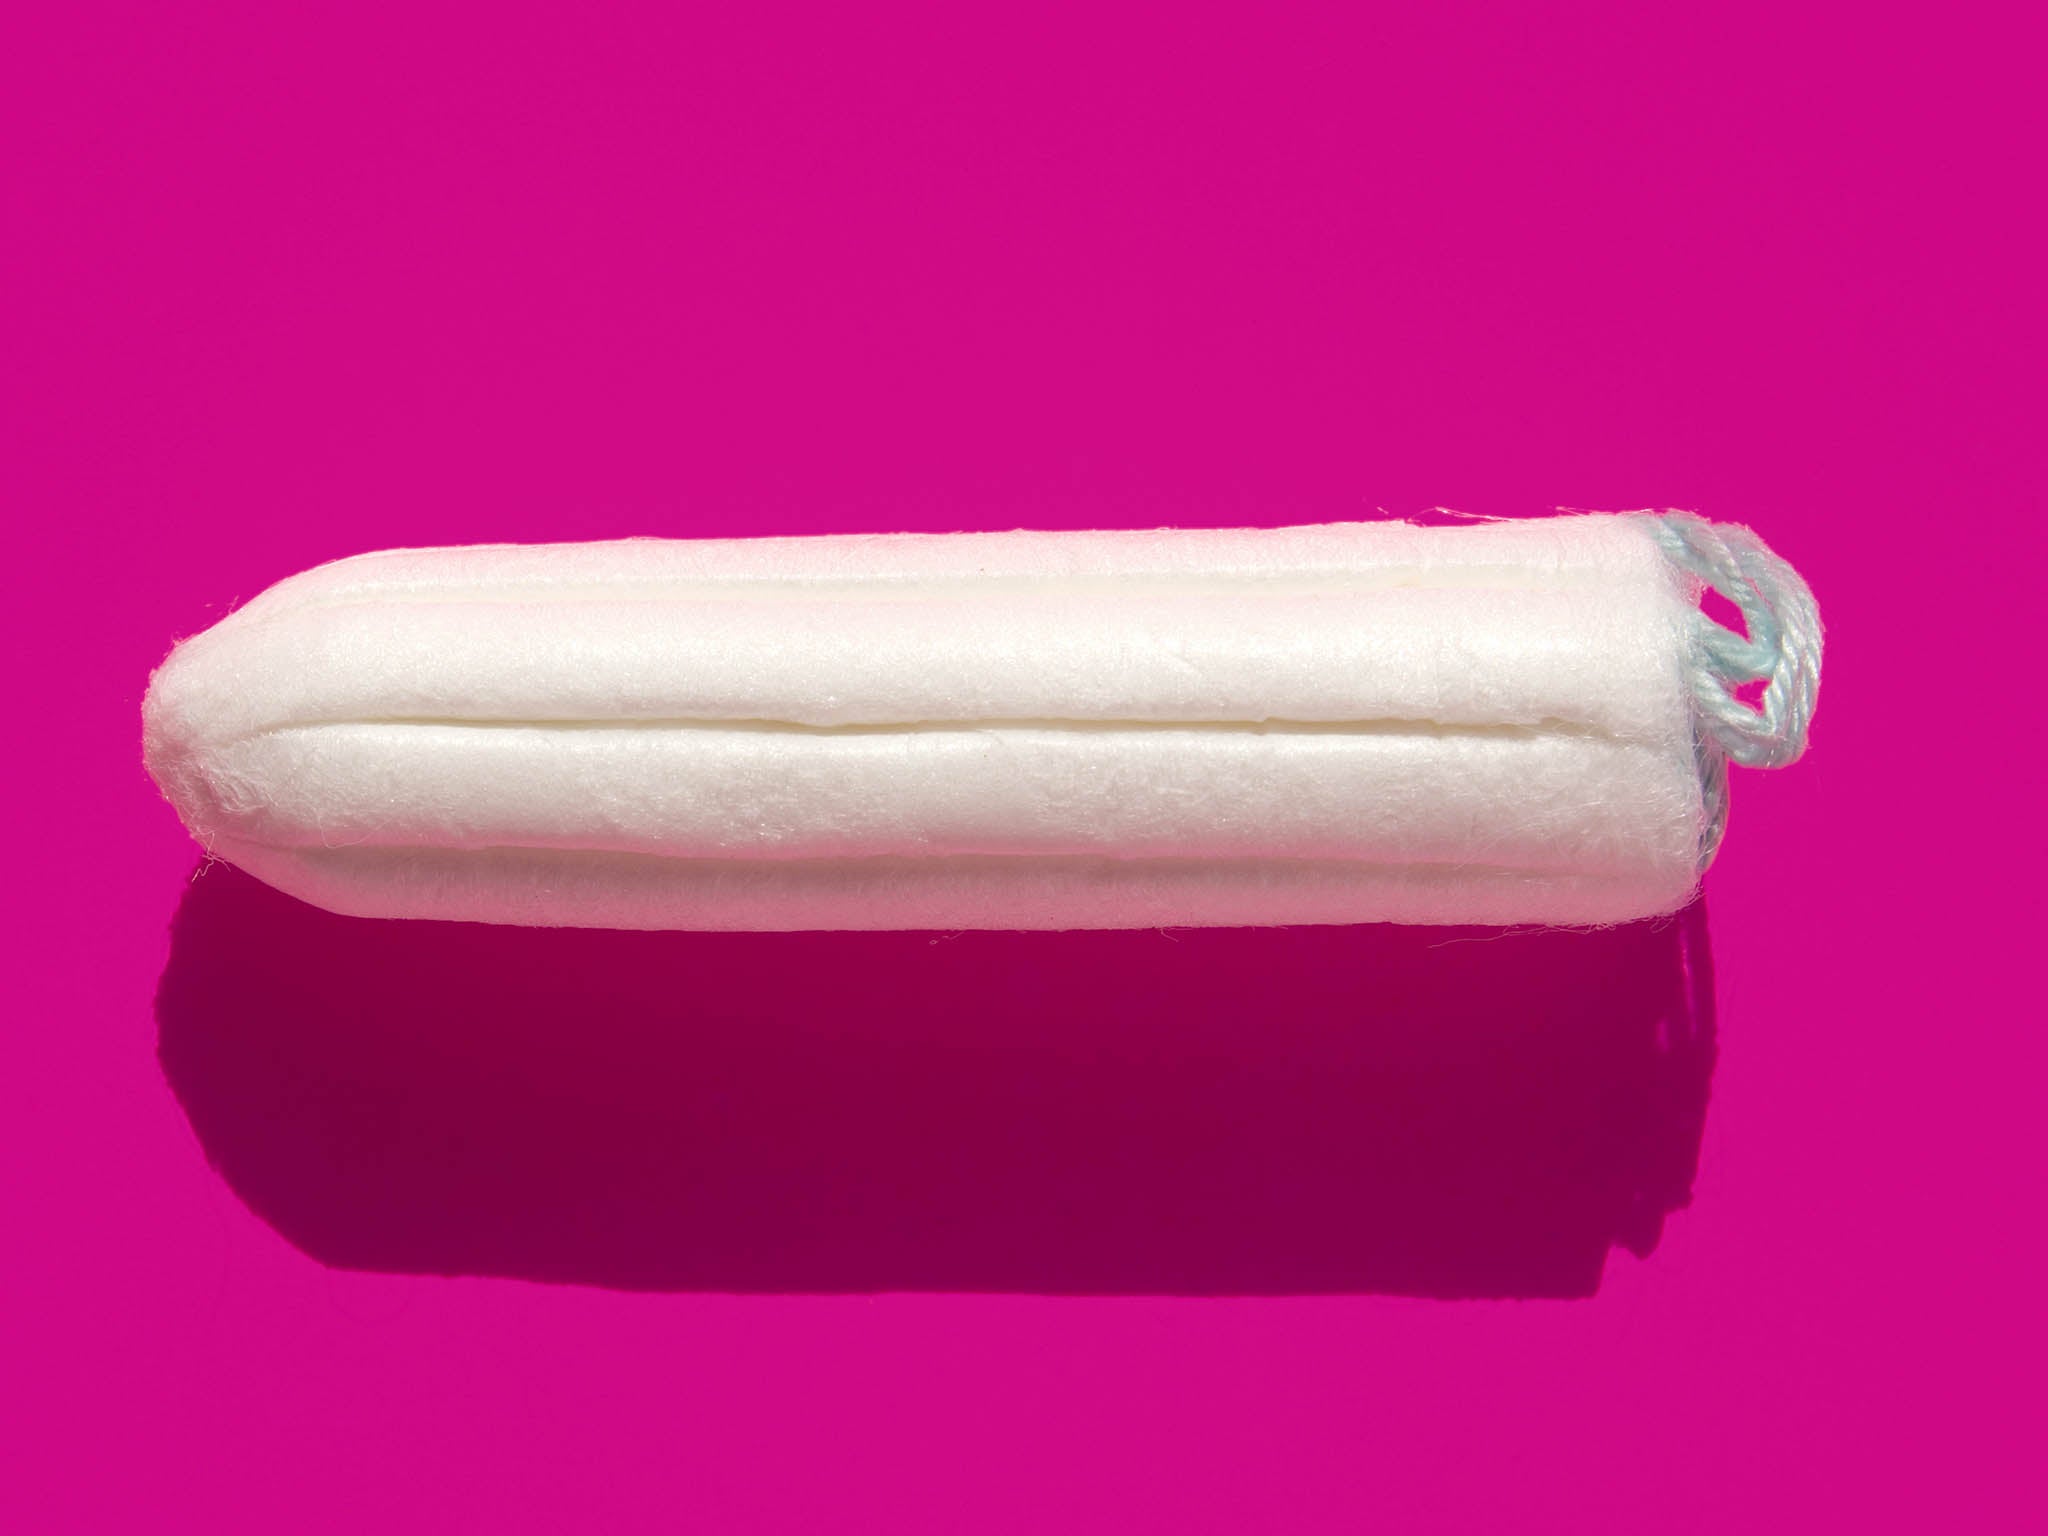 Research finds 91 per cent of girls worry about going to school when on their period